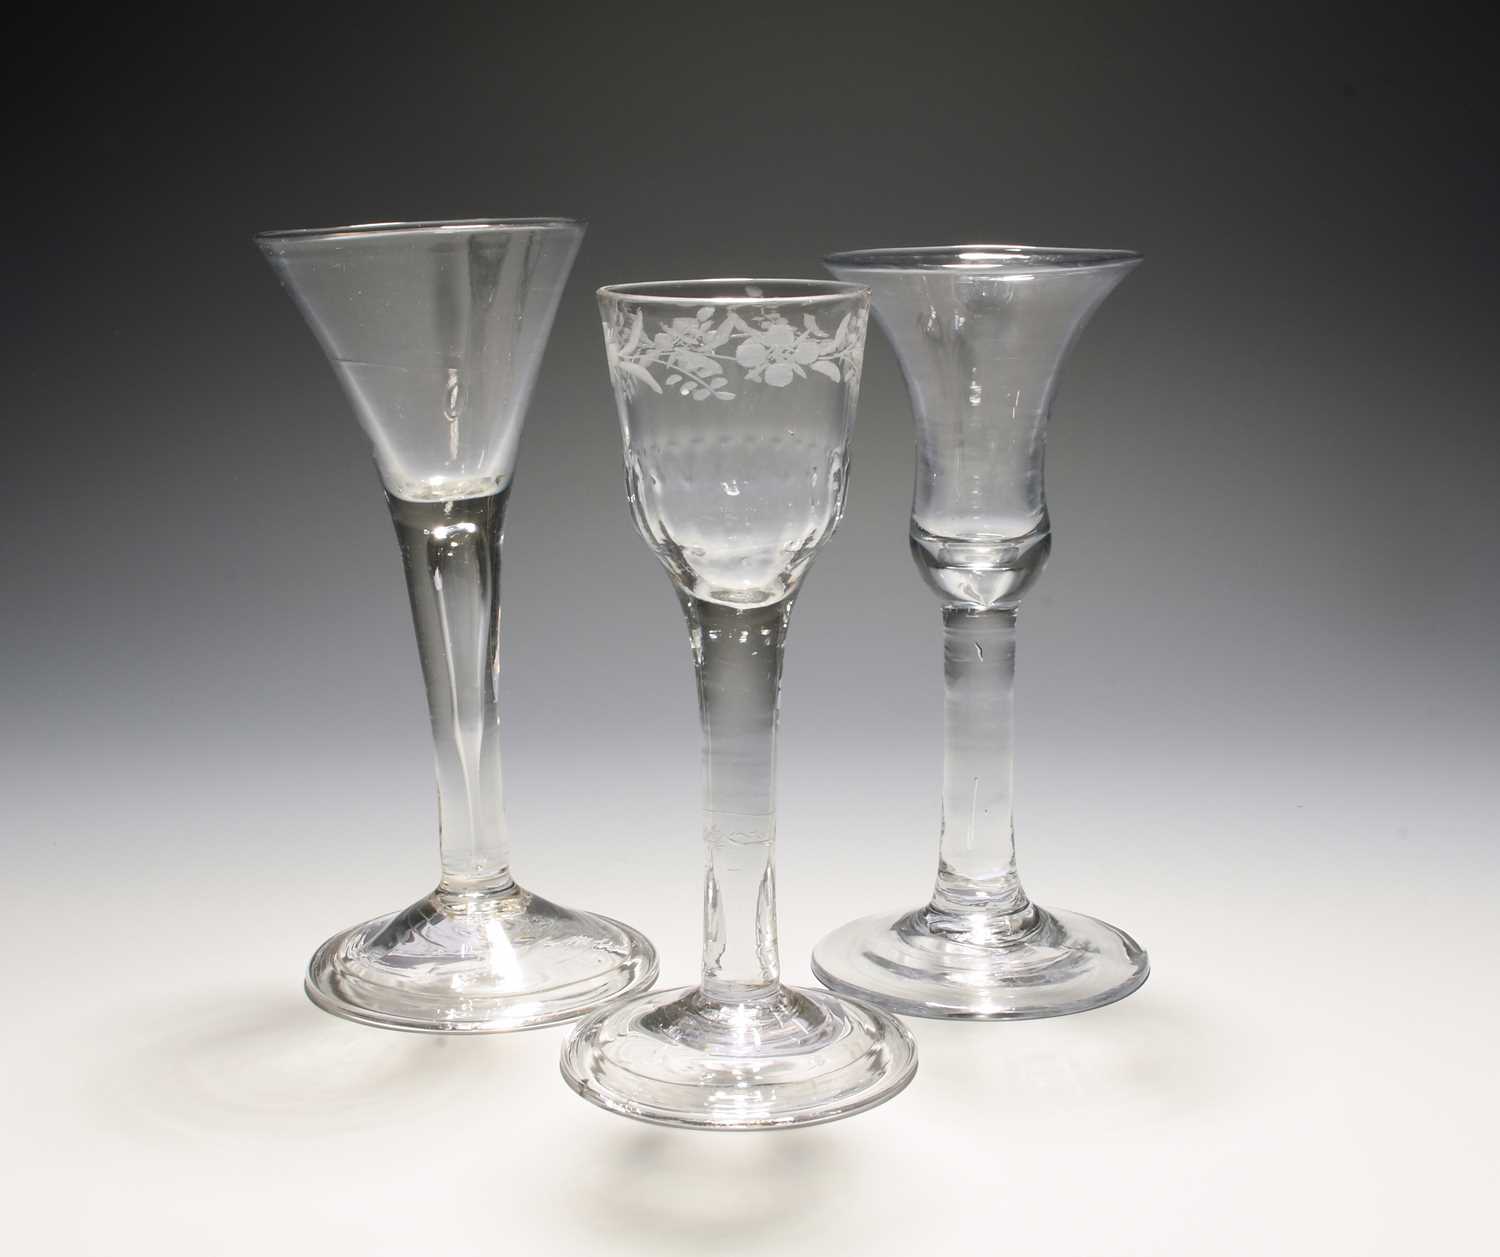 Three wine glasses, mid 18th century, one with a bell bowl on a plain stem, another a drawn